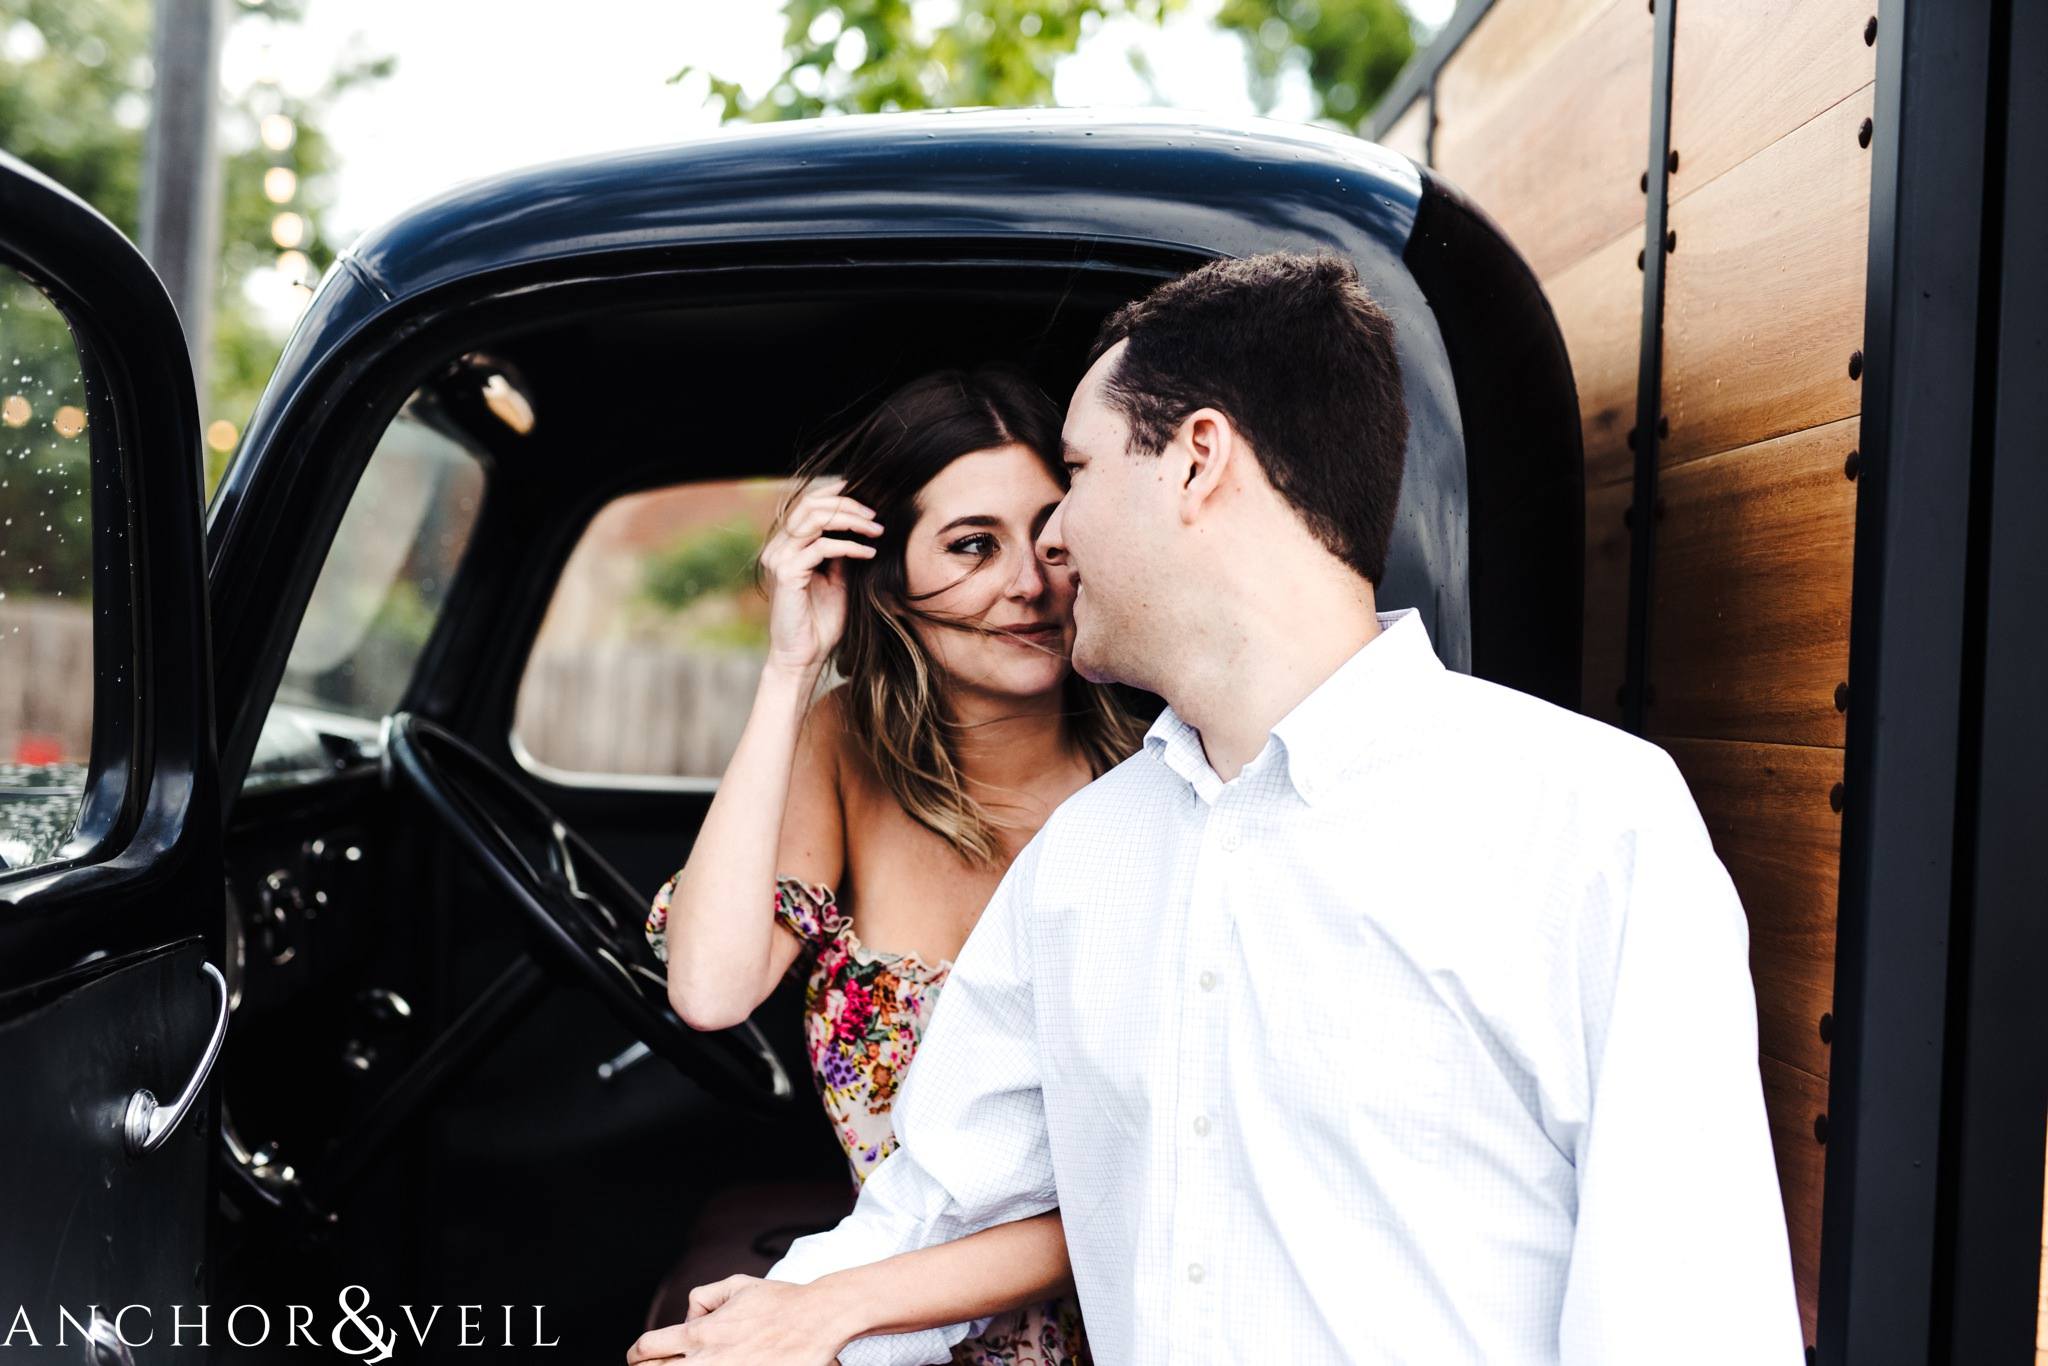 picking up hair when its blowing during the Uptown Charlotte Sycamore Brewery Engagement Session